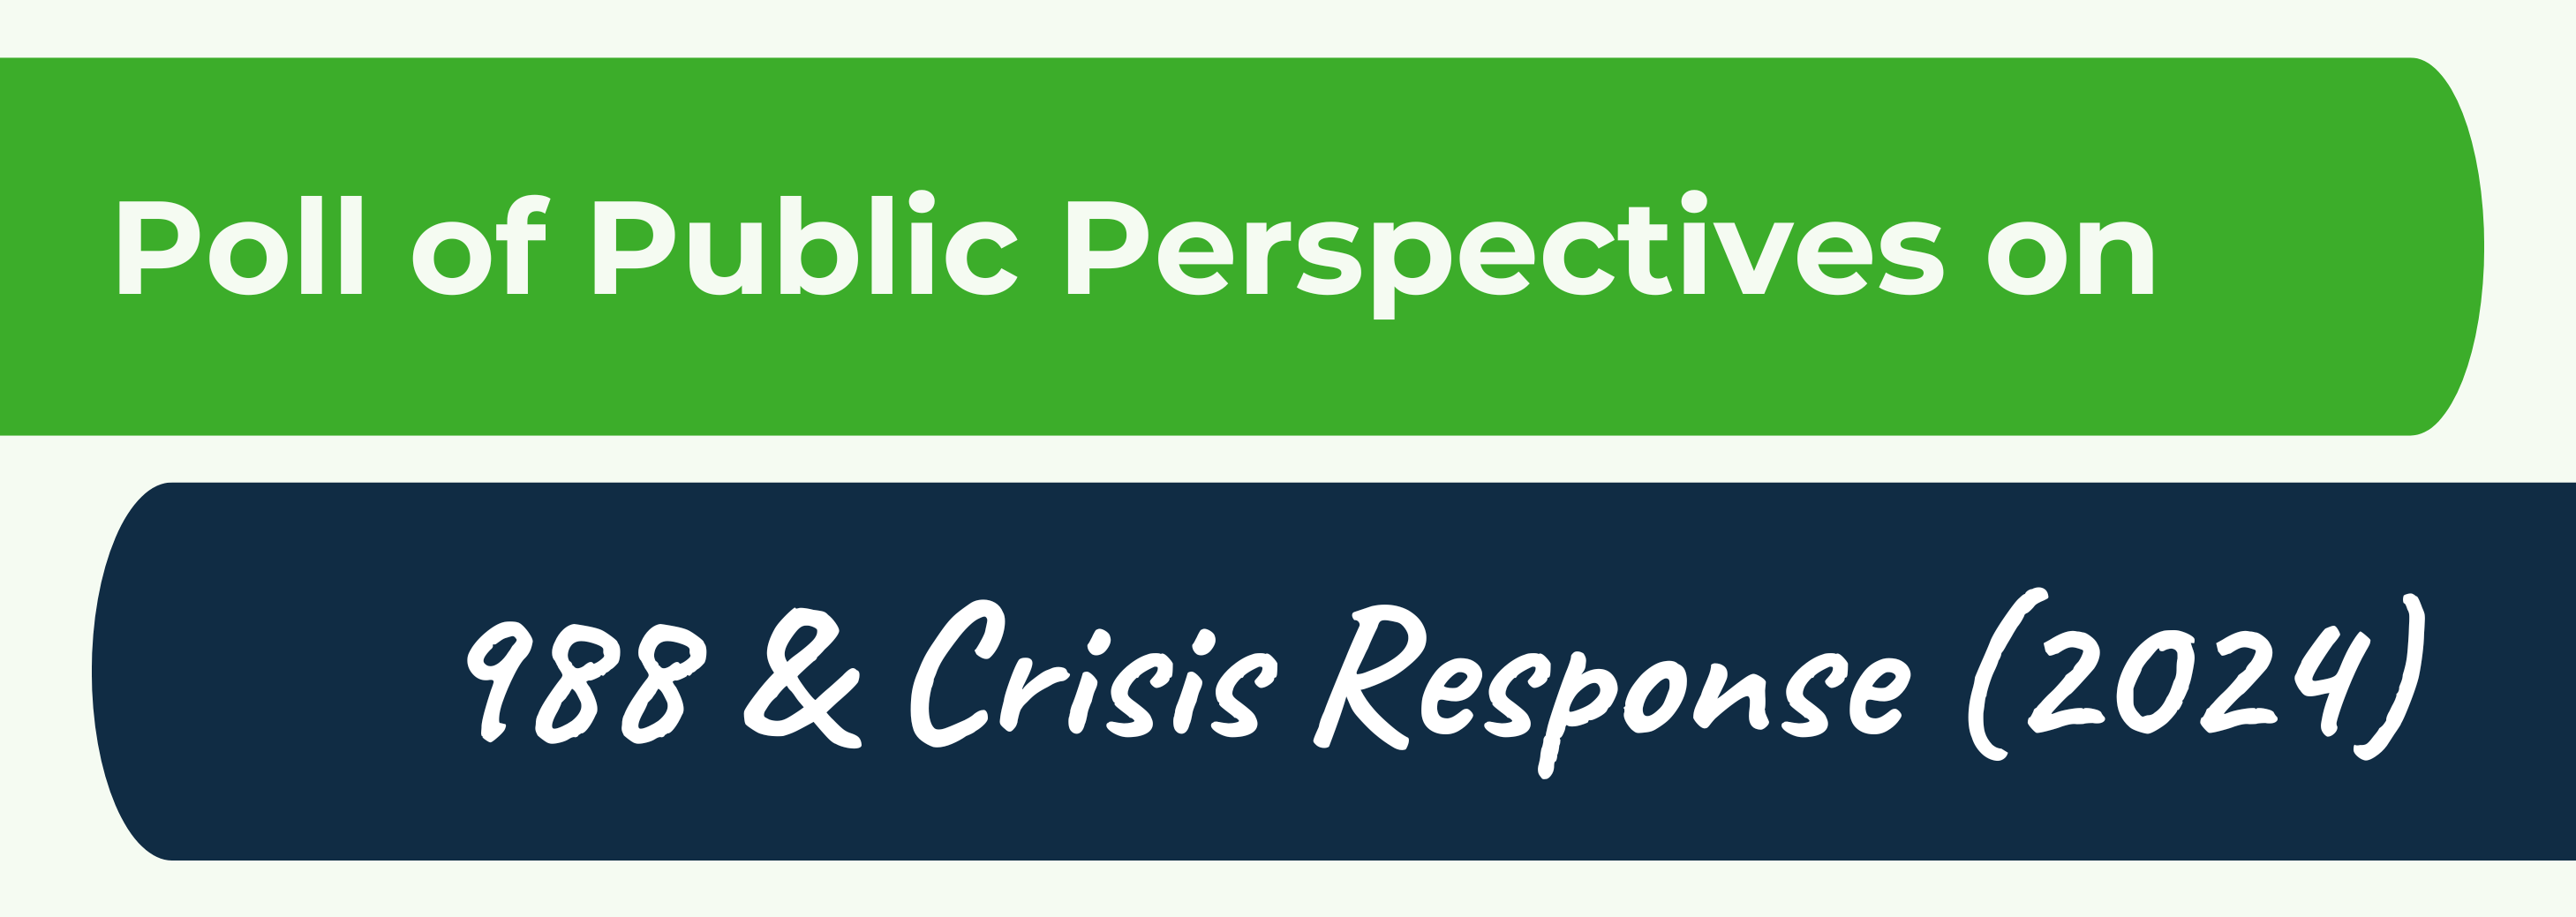 Poll of Public Perspectives on 988 & Crisis Response (2024)